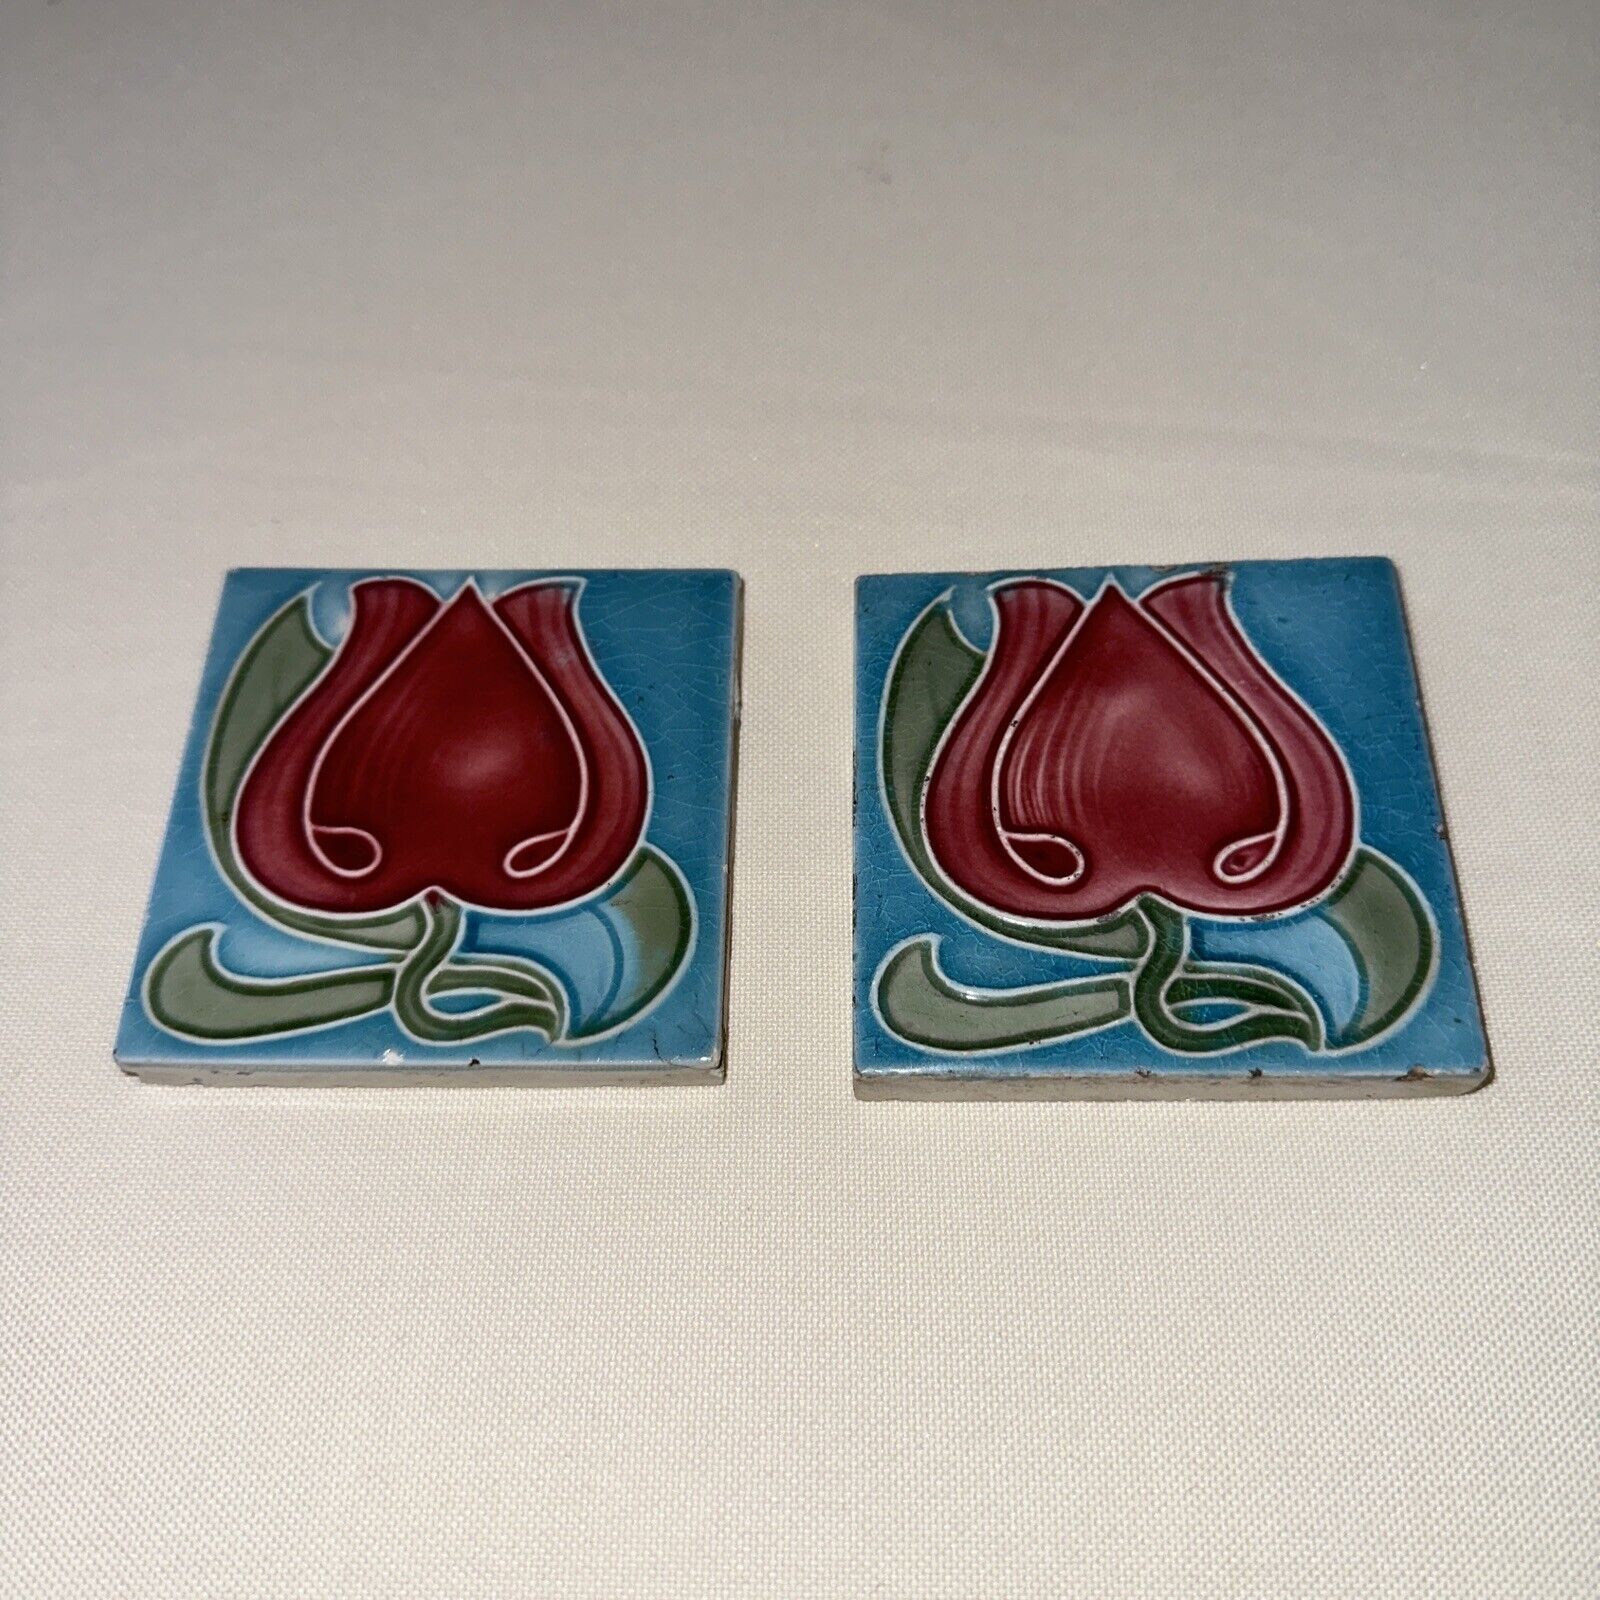 Alfred Meakin Ltd. One Lot of 2 Antique Tile 3”X3”X 1 Cm. Made in England